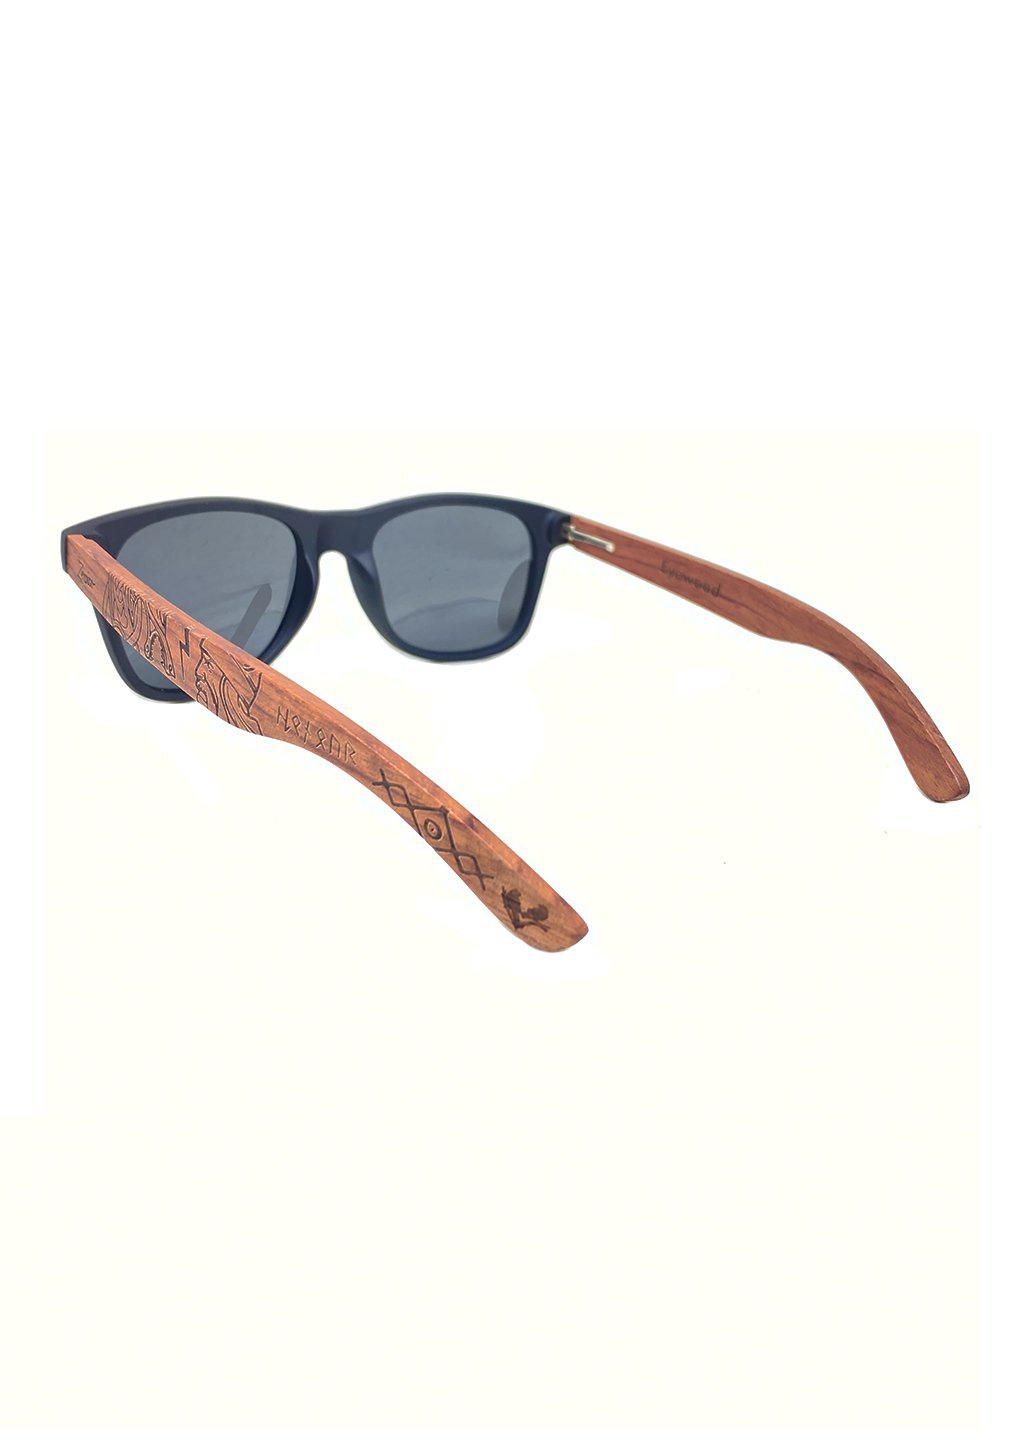 Engraved wooden sunglasses - Vikings Our model based on the Viking era and the culture. Studio photo from the back.